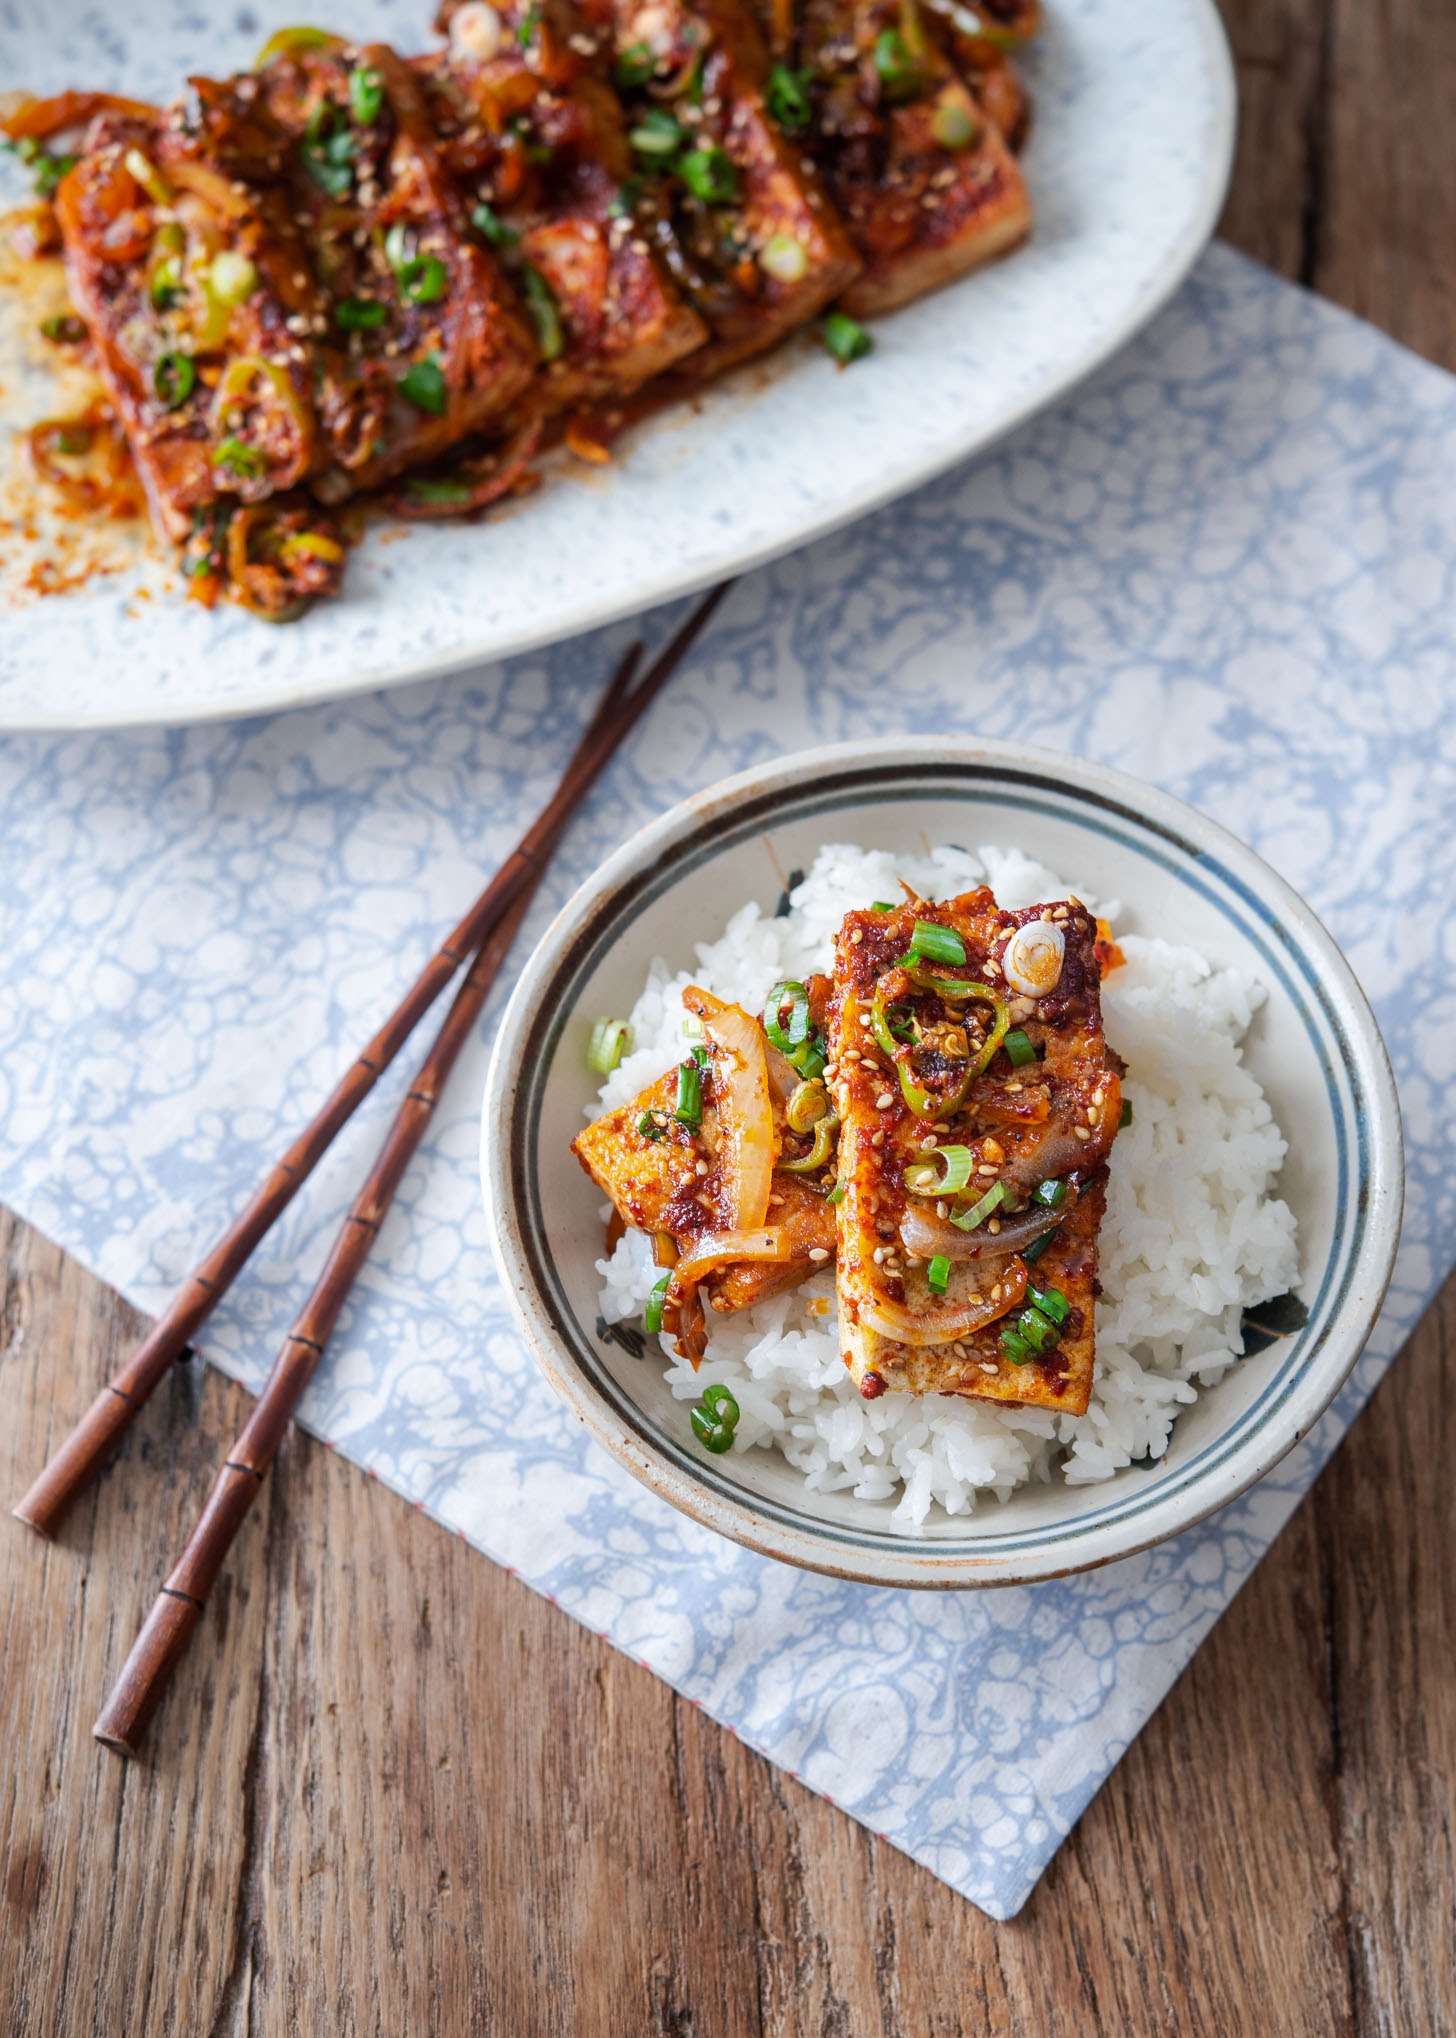 2 spicy tofu slices are placed on top of a bowl of rice next to chopsticks on a napkin.